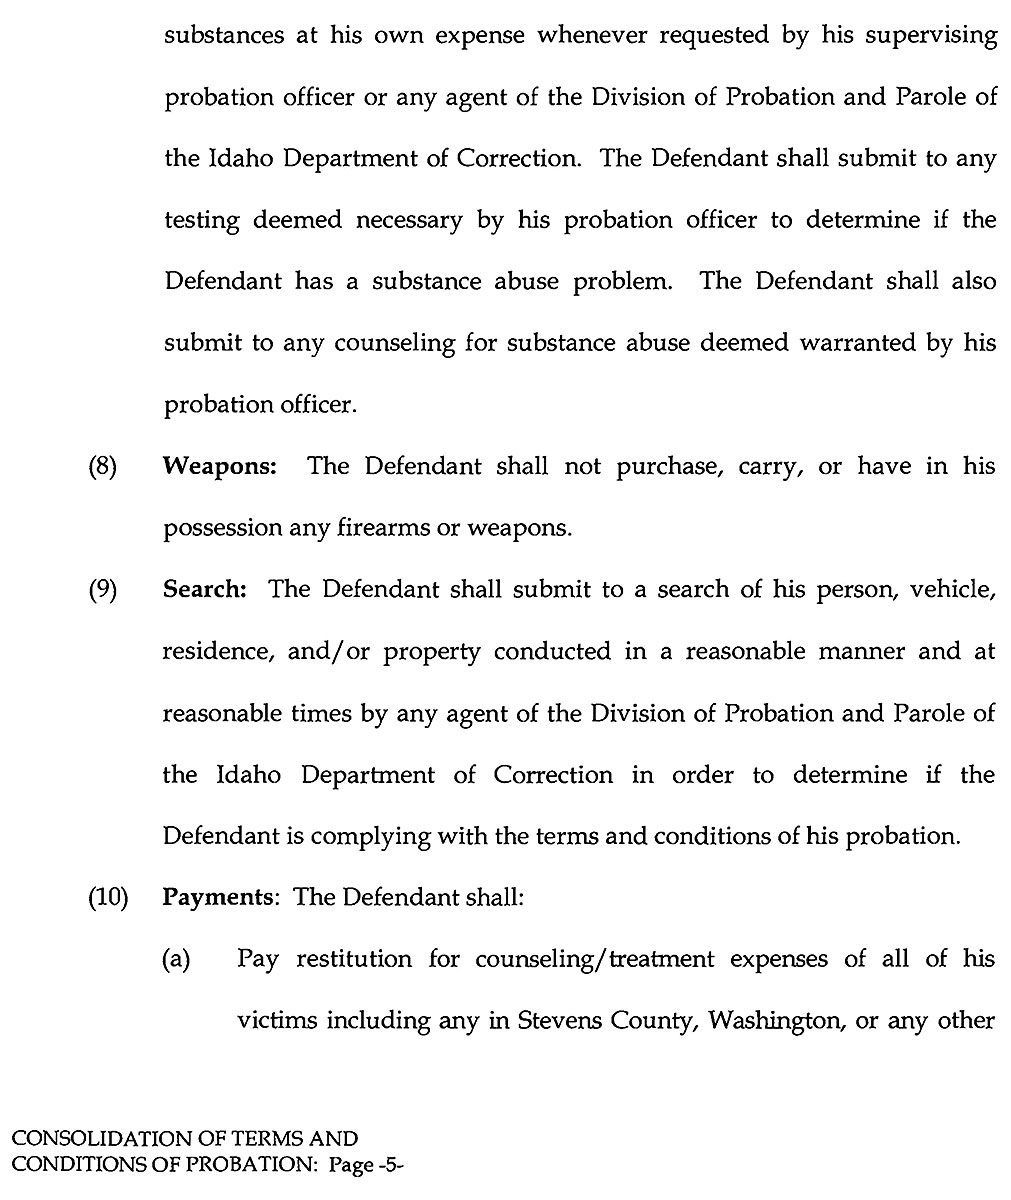 Consolidation of Terms and Conditions of Probation page 5